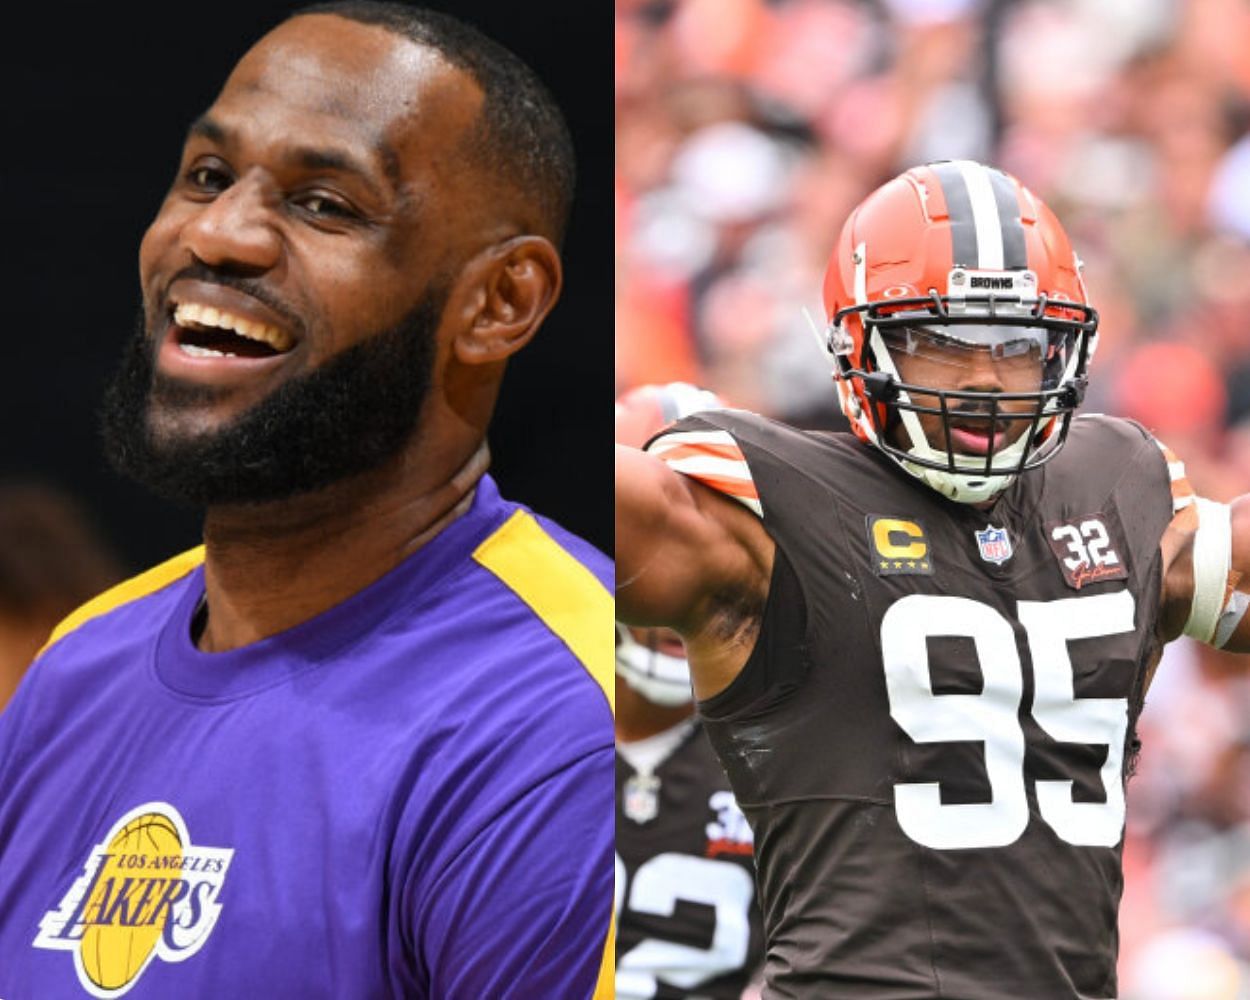 LeBron James supports the NFL